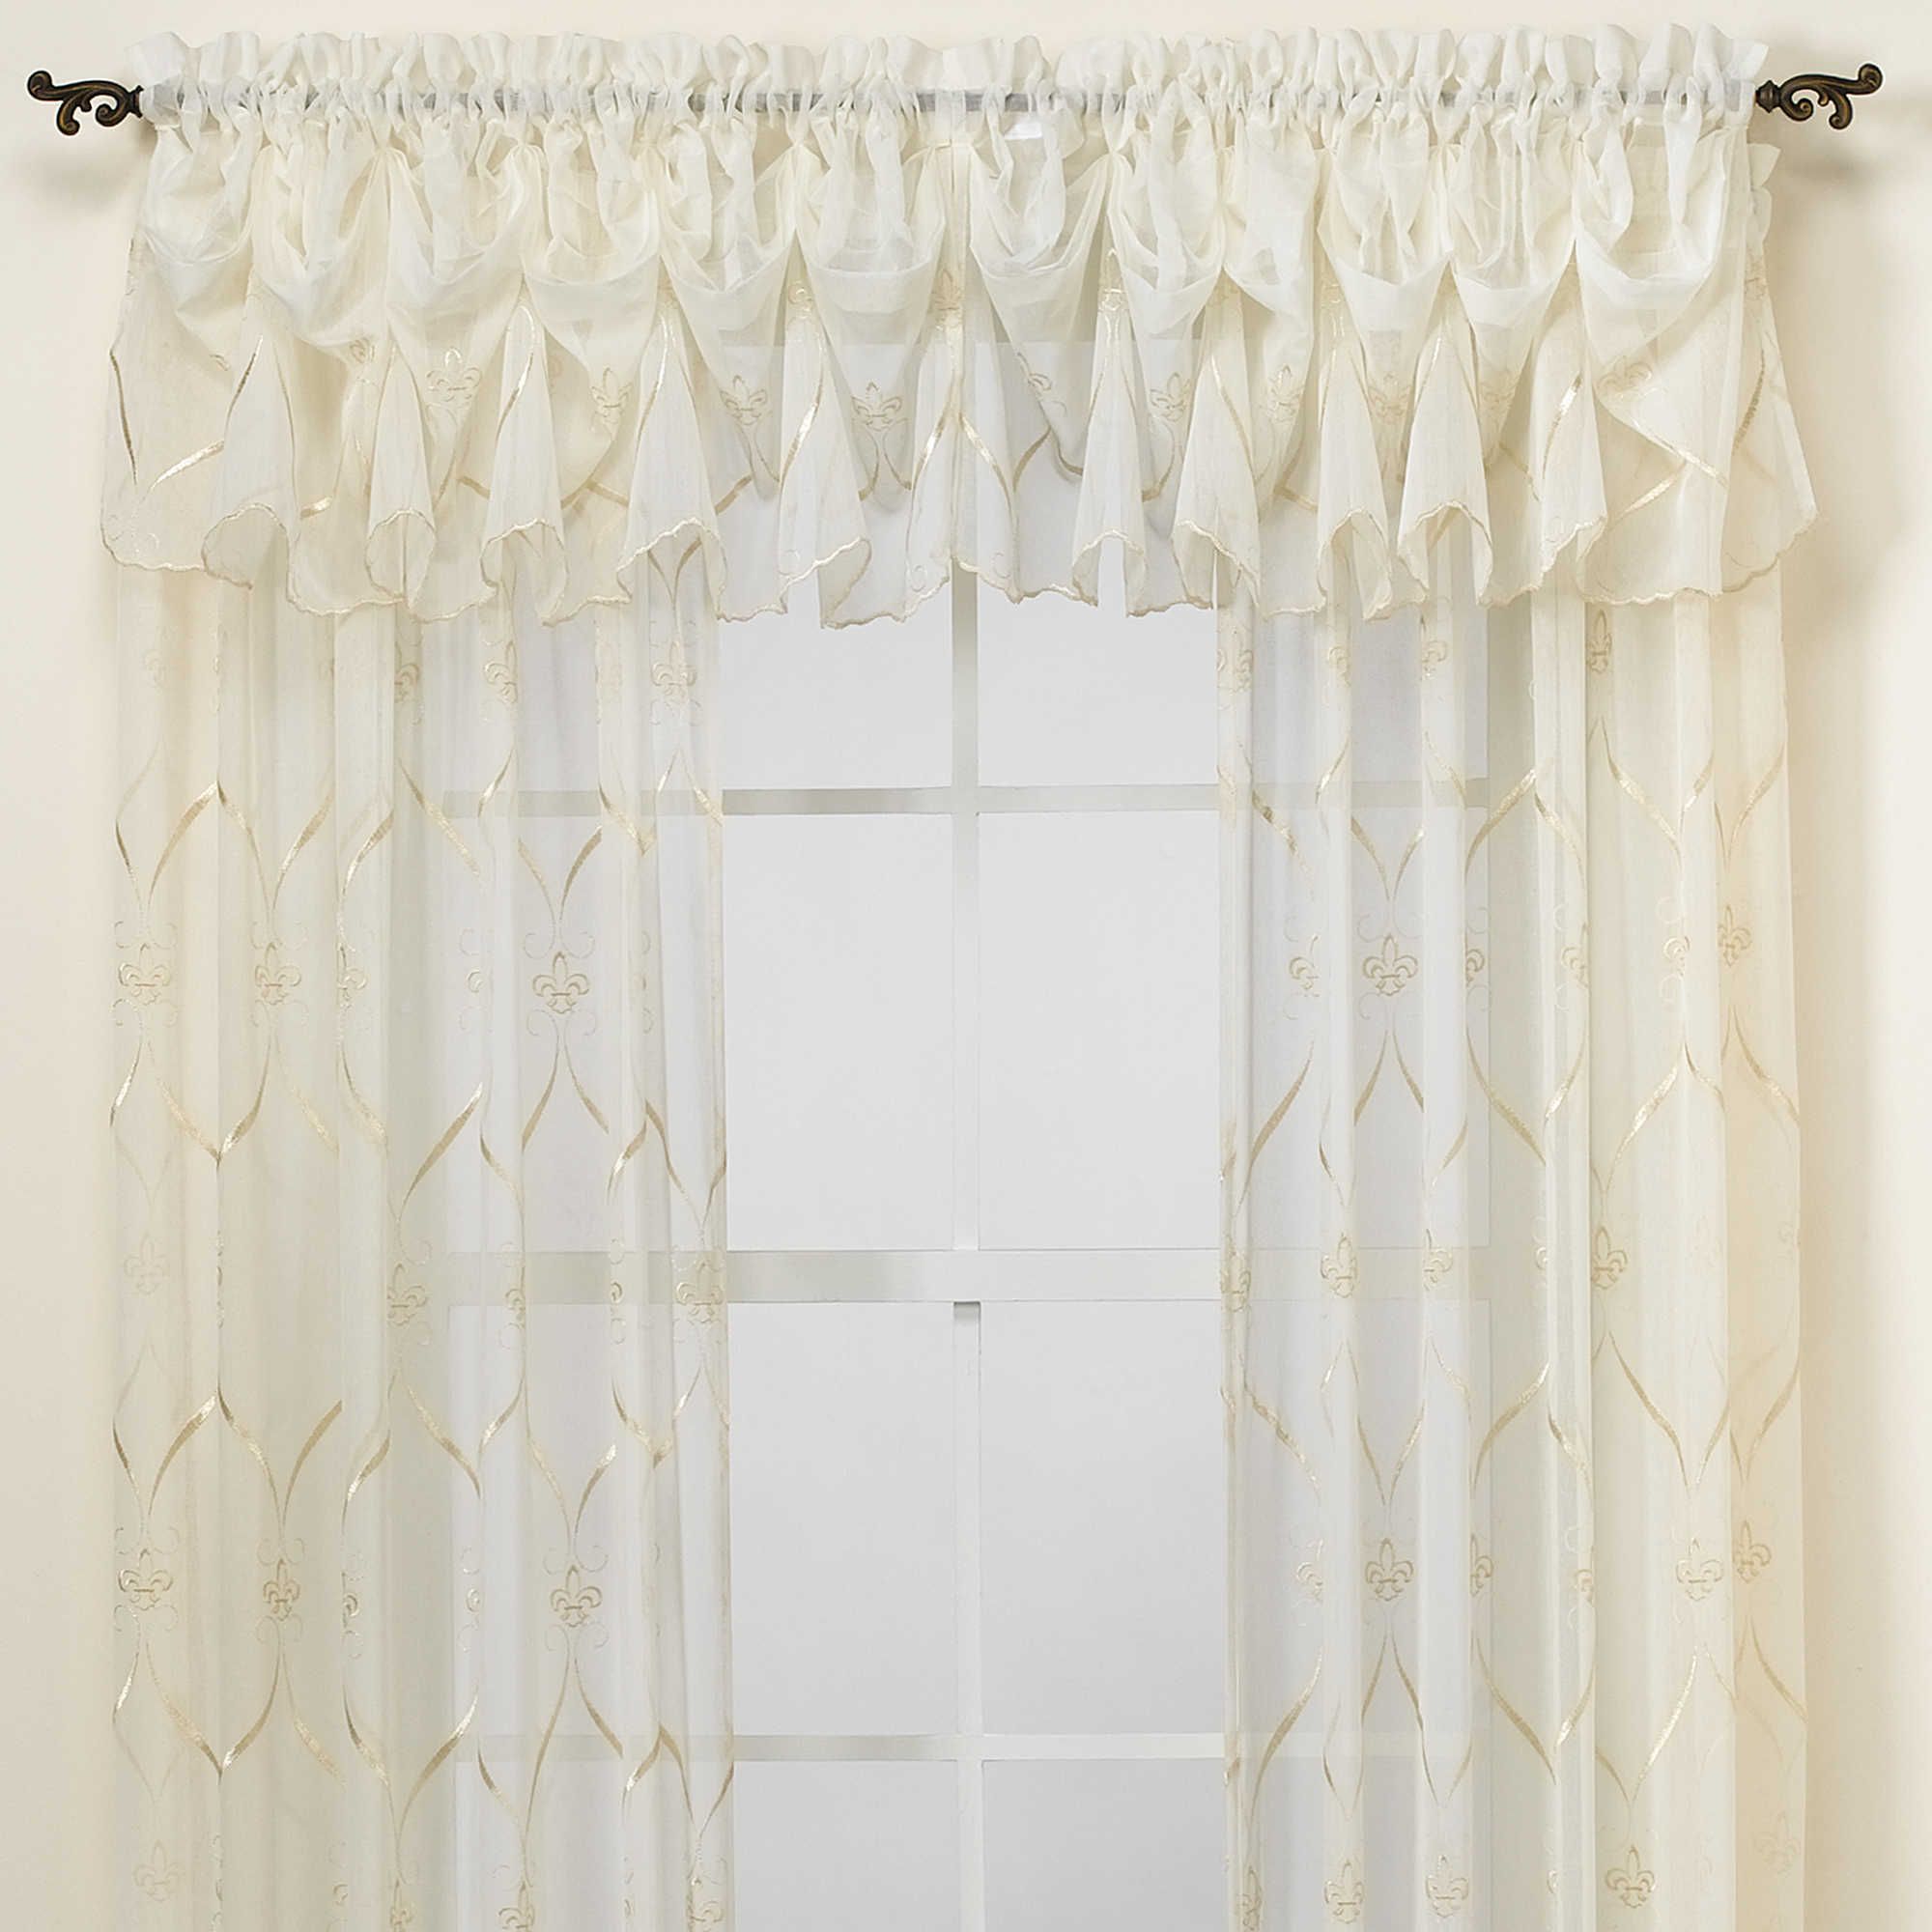 Croscill® Cavalier Sheer Window Panel | Entry/dining Room Within White Knit Lace Bird Motif Window Curtain Tiers (View 19 of 20)